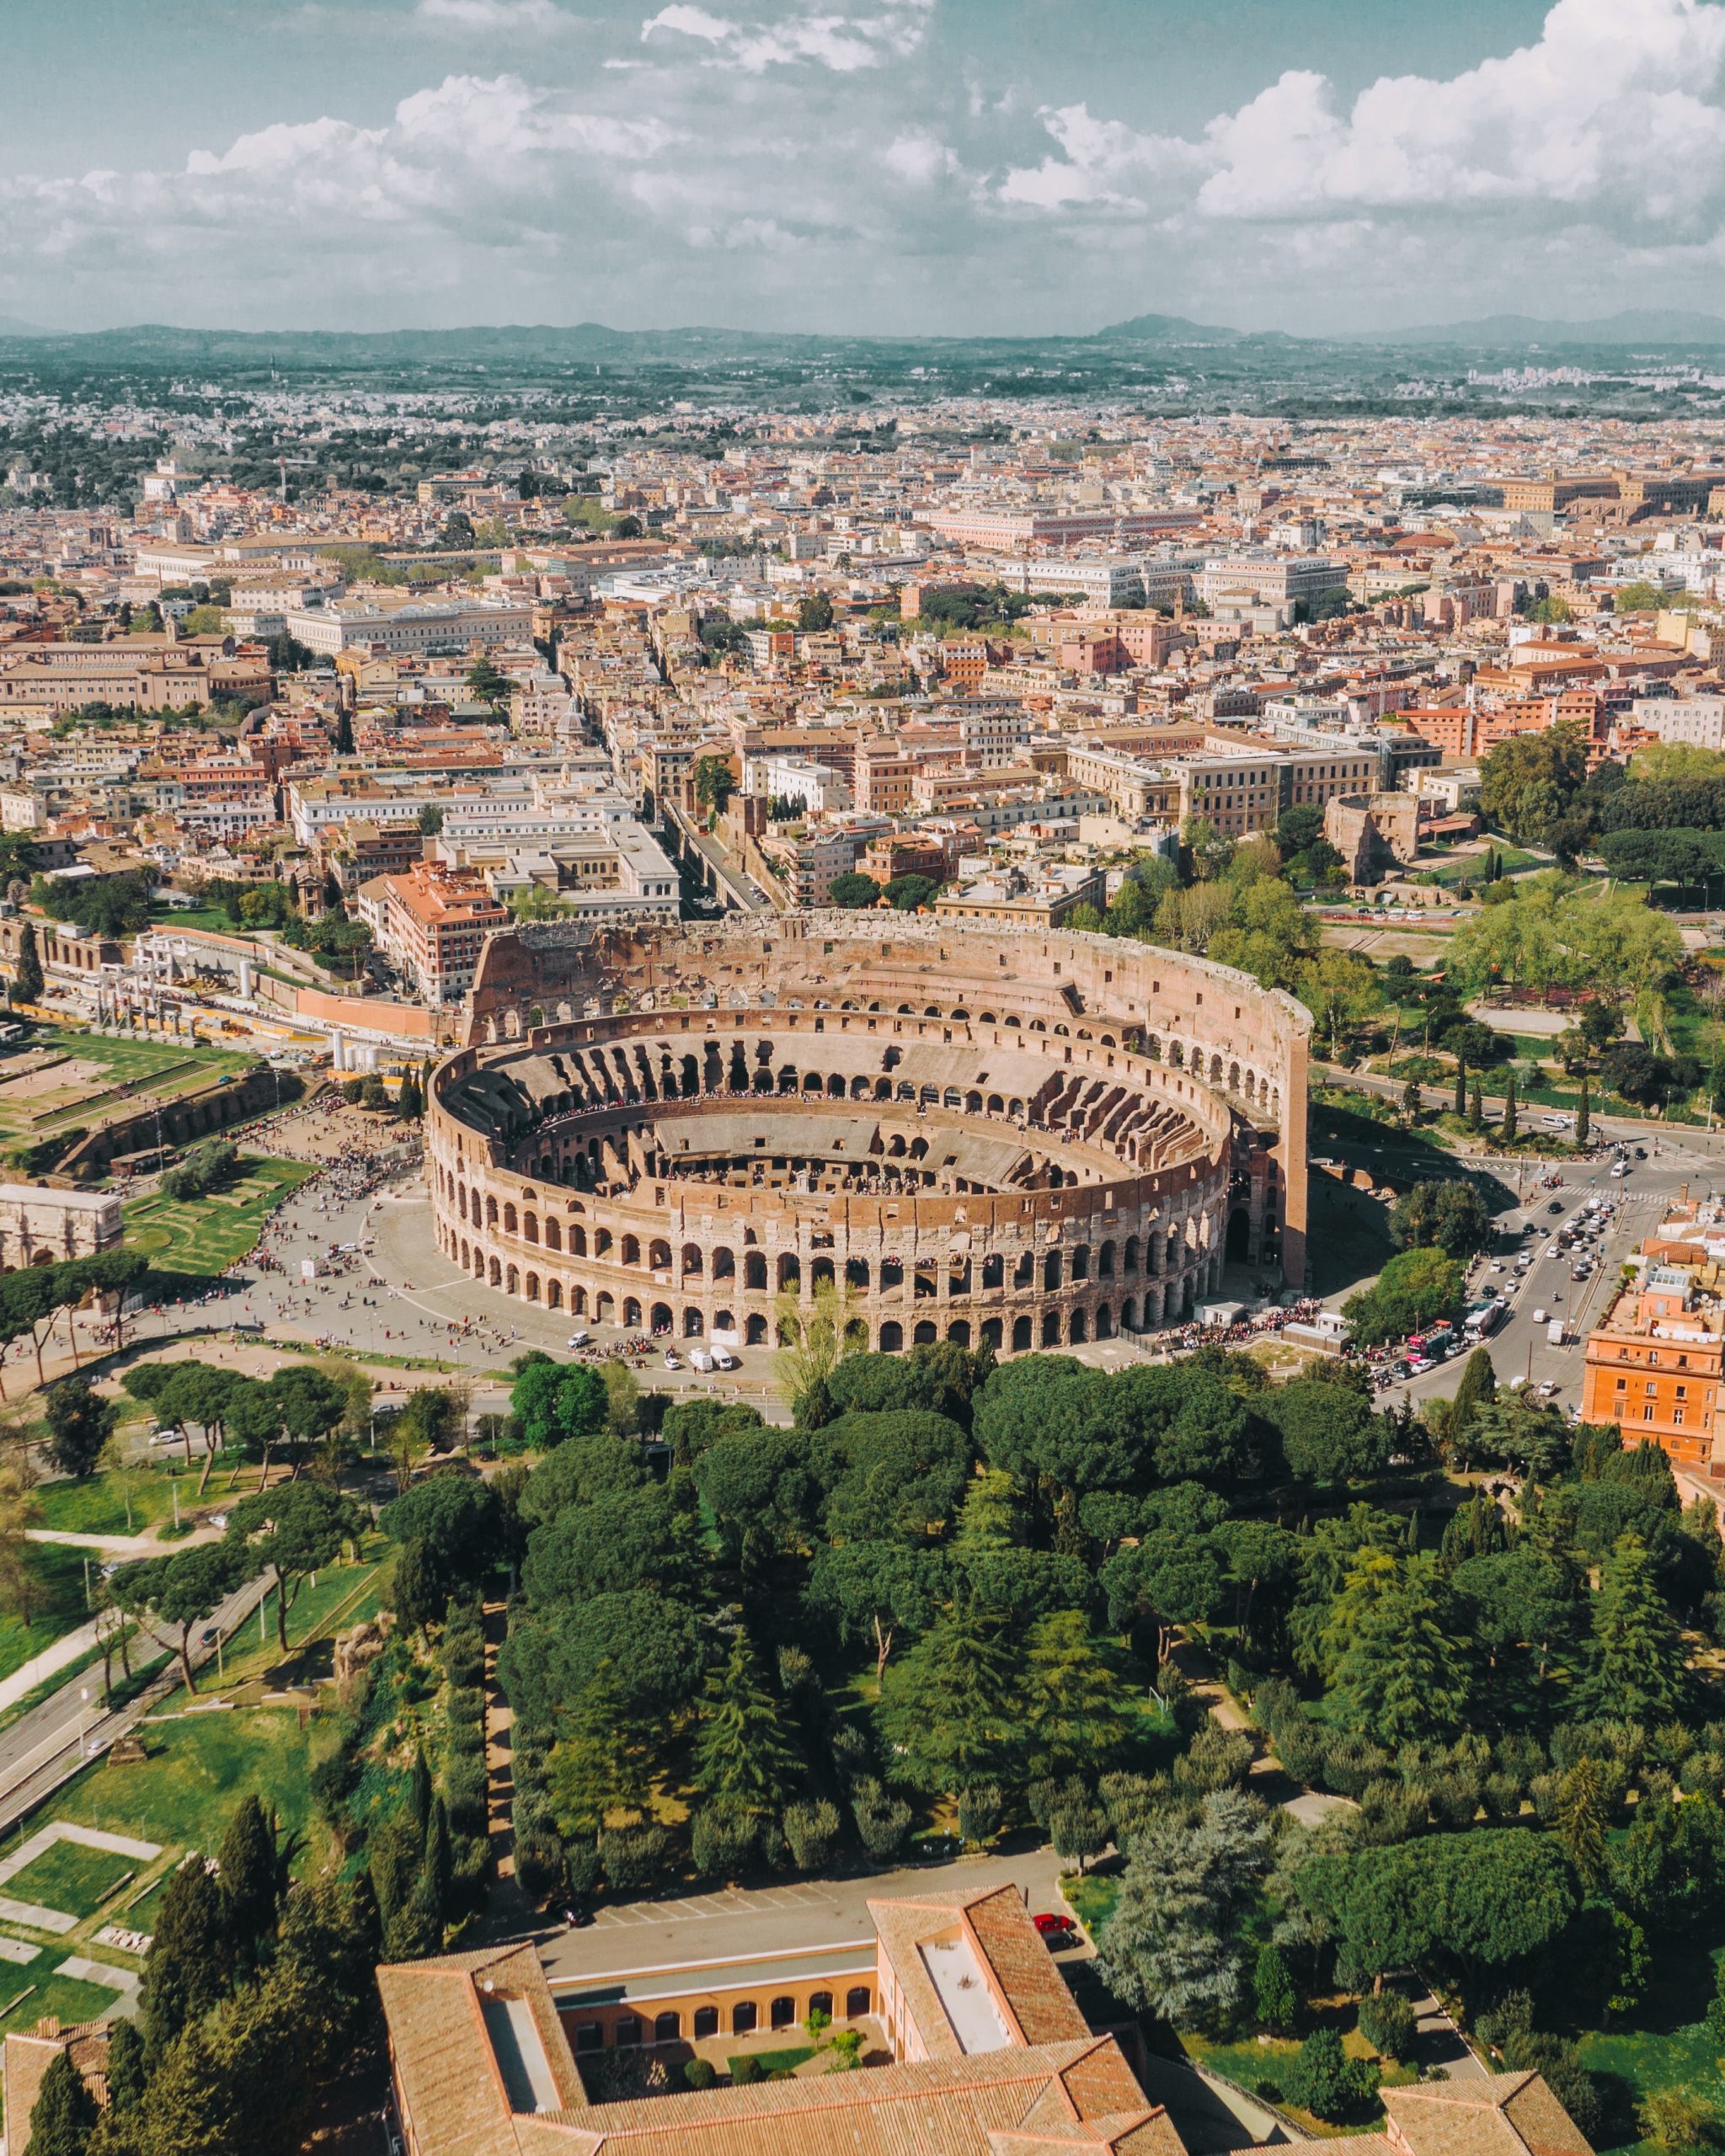 Must-see attractions in Rome